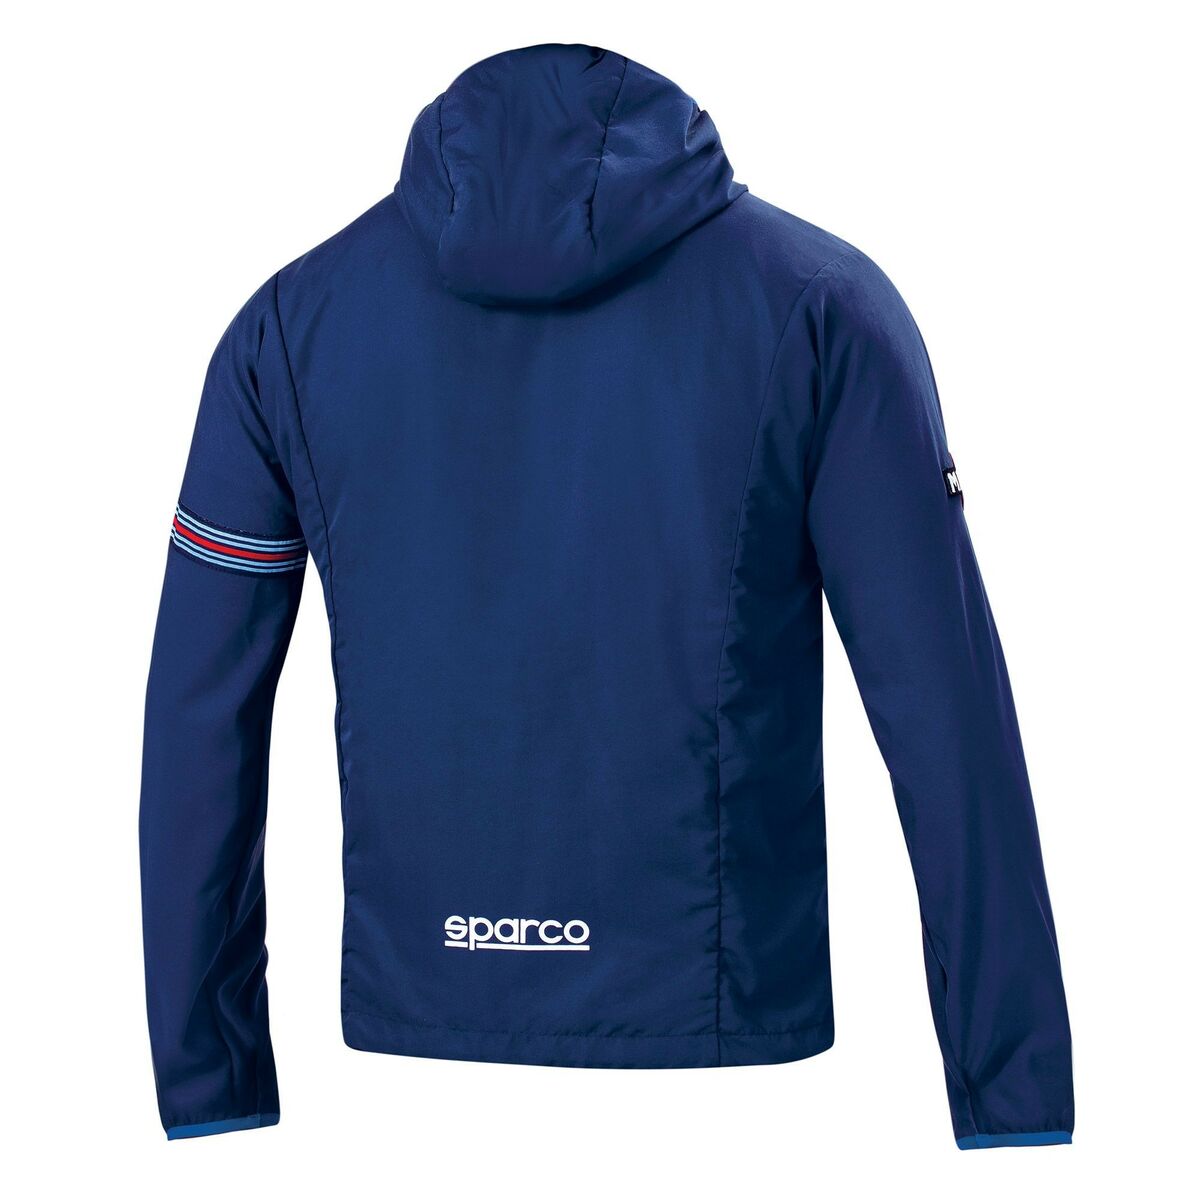 Windcheater Jacket Sparco Martini Racing XL Navy Blue